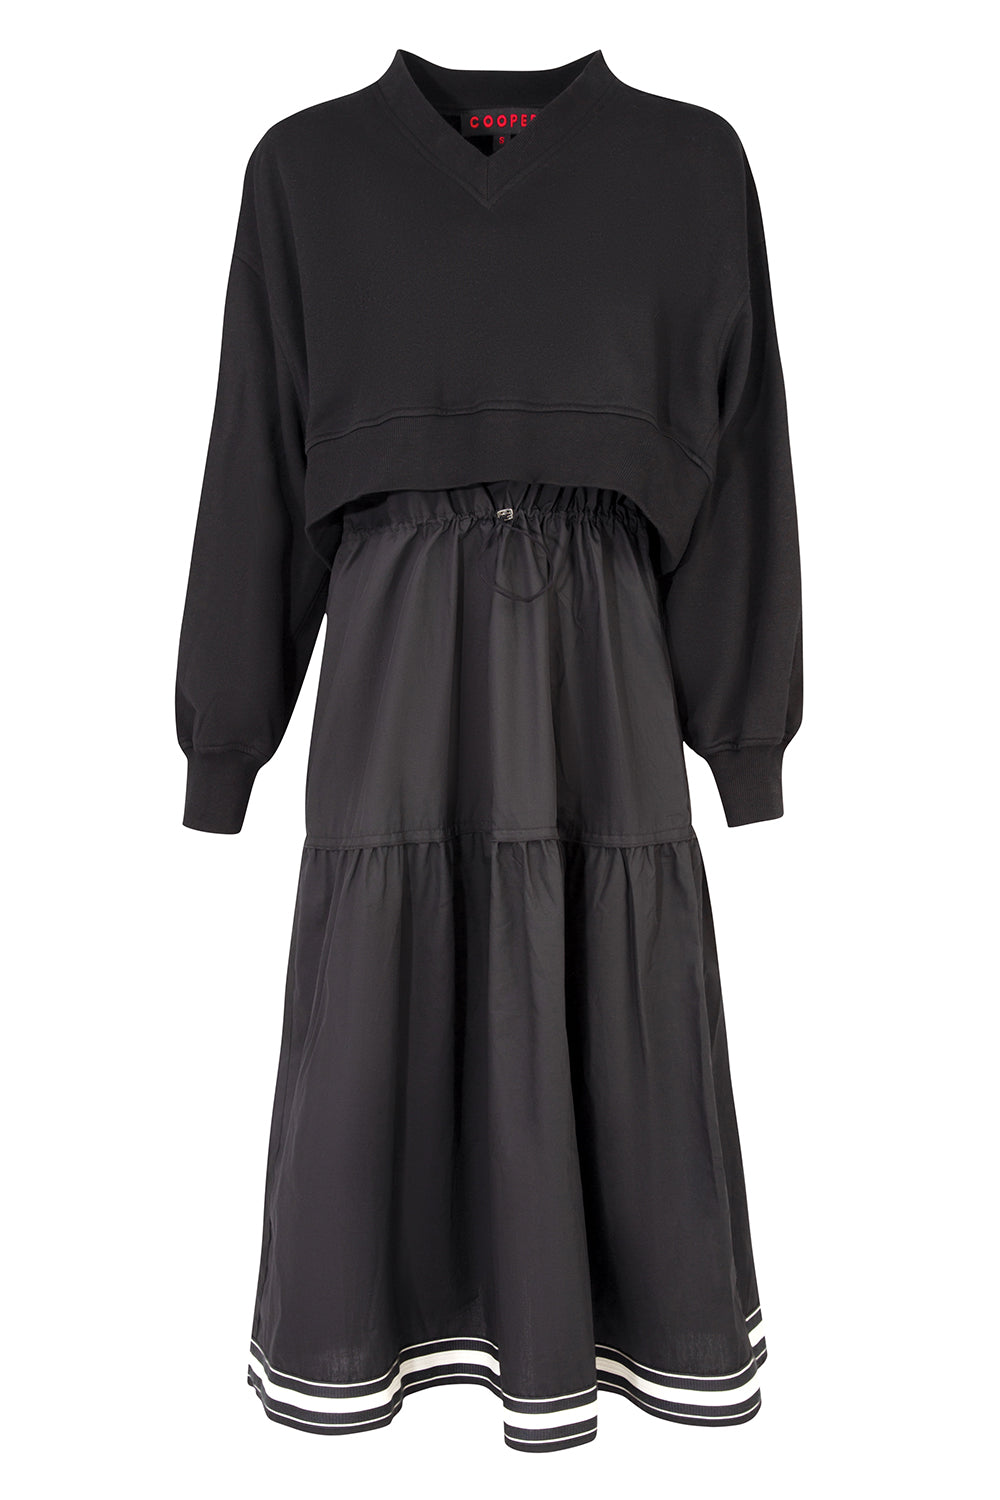 Cooper Two of A Kind Dress Black